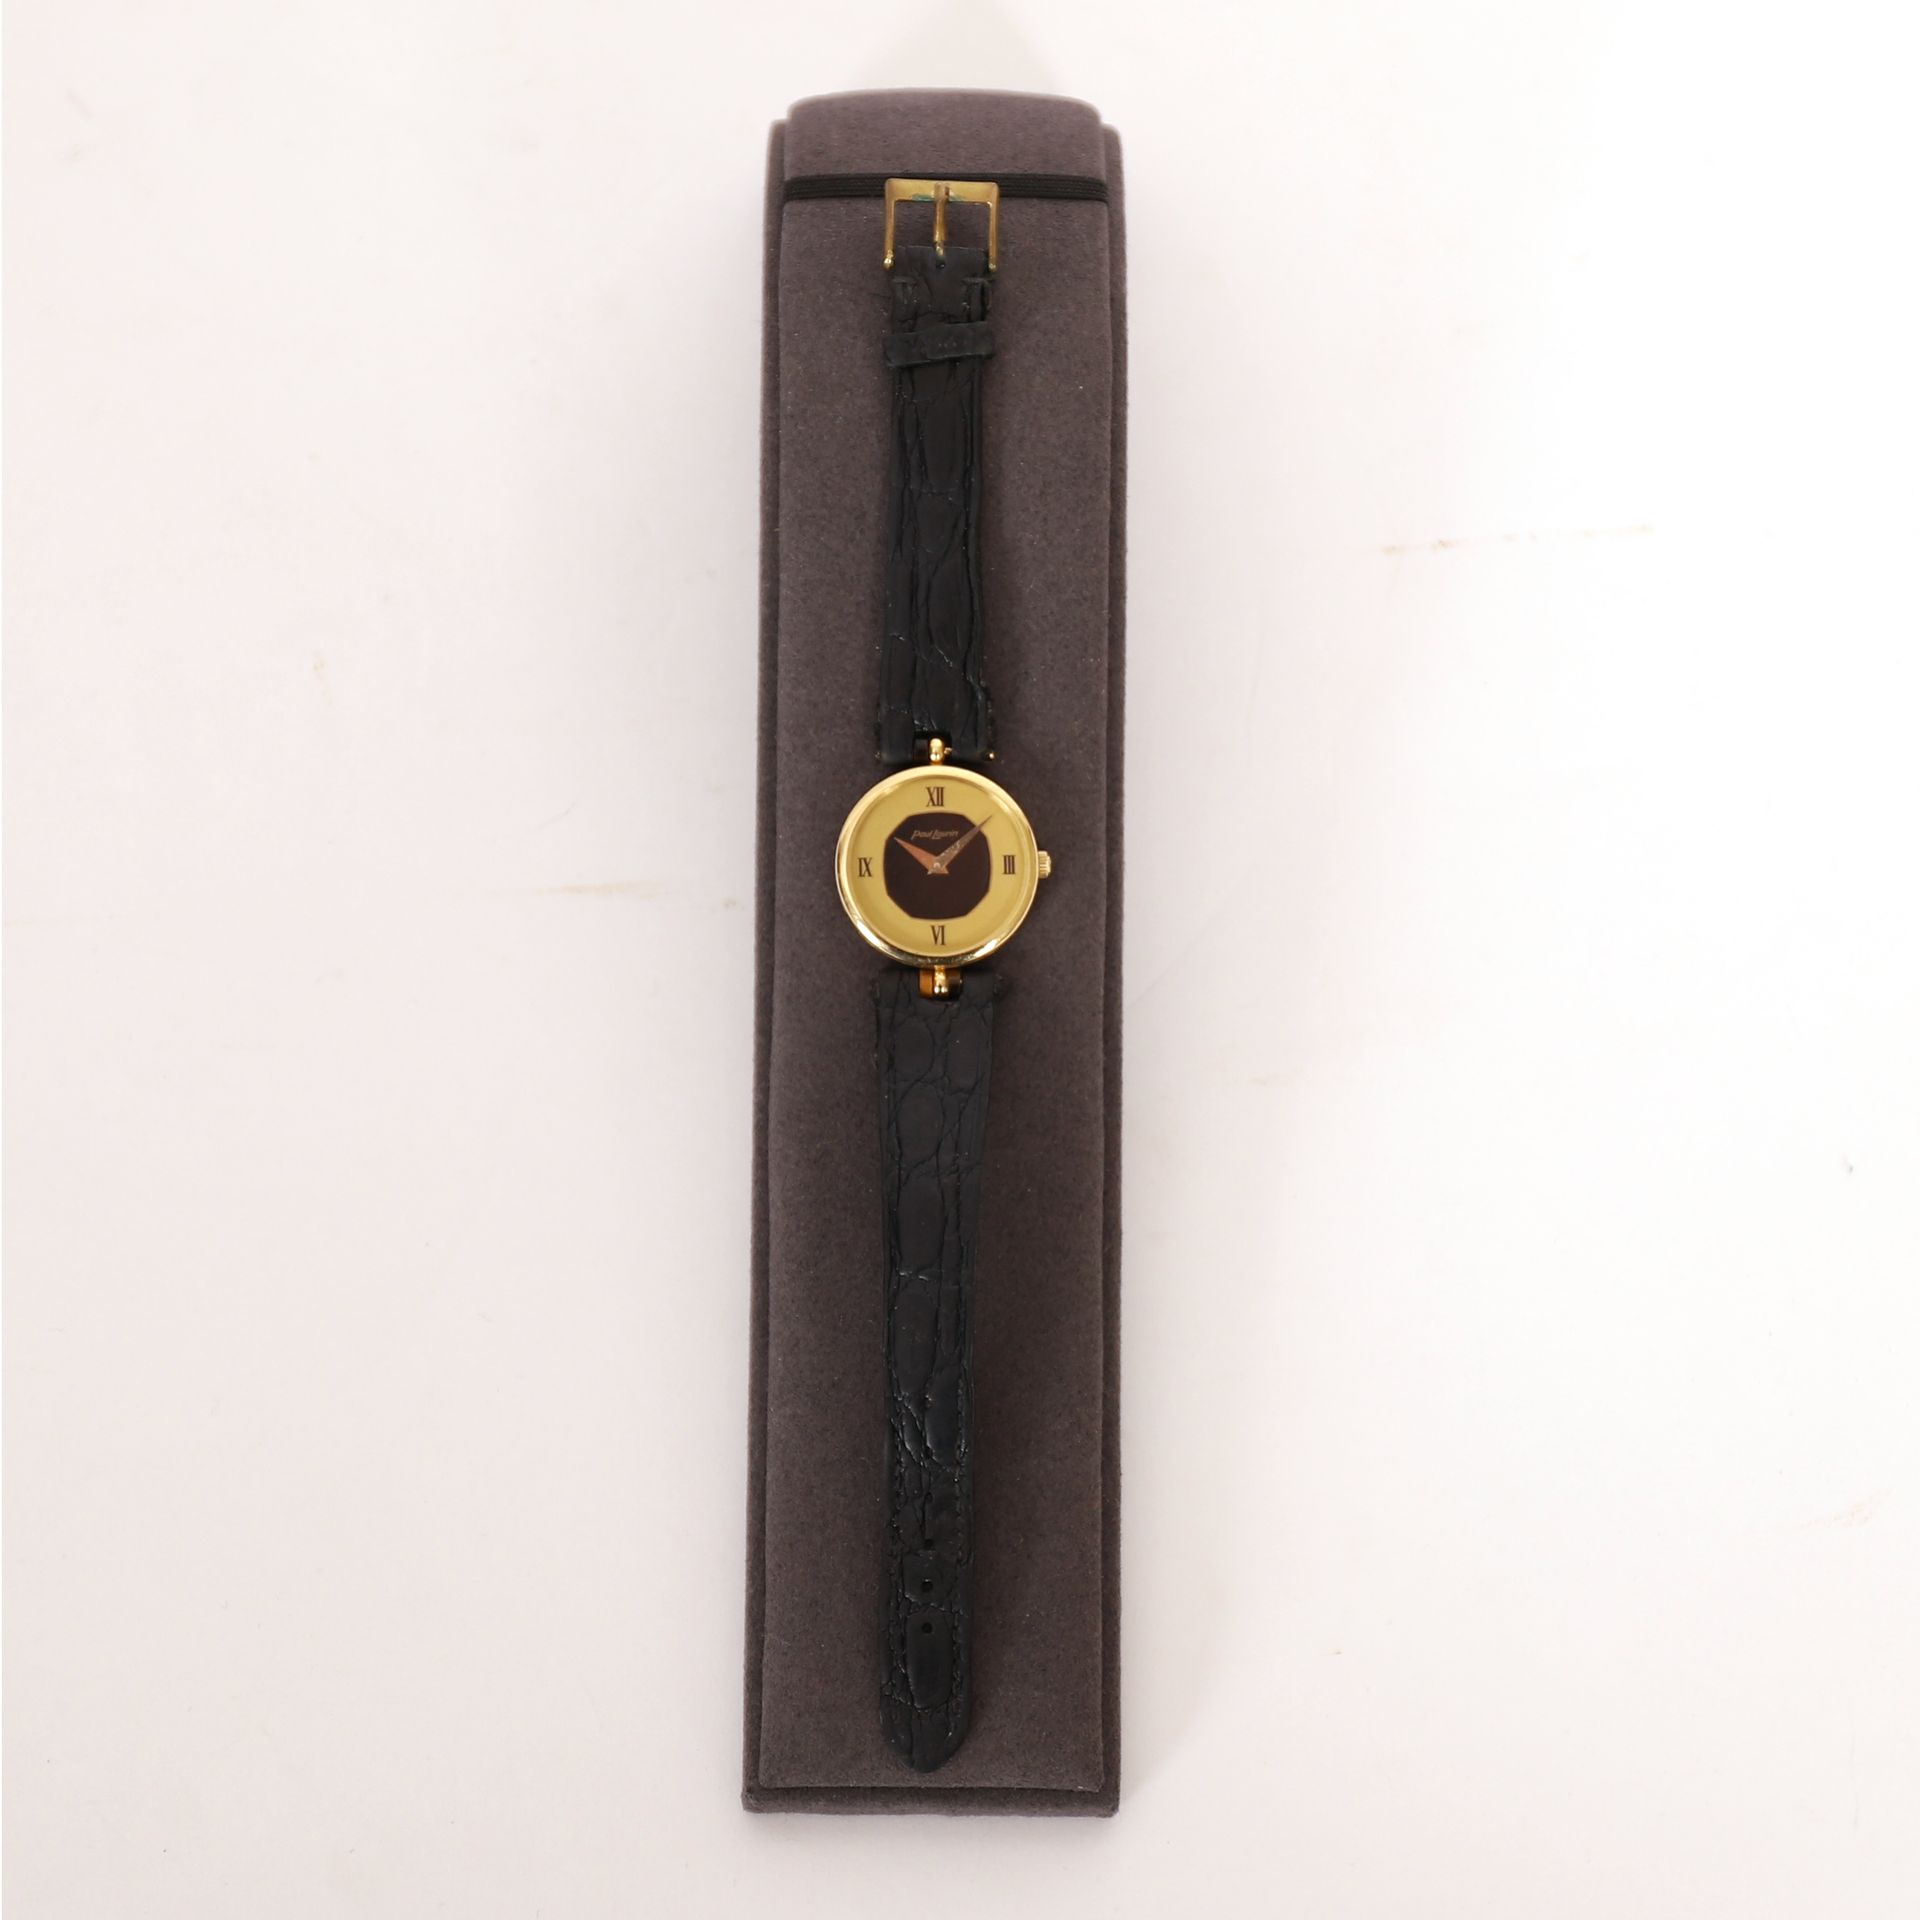 Null PAUL LAURIN GOLD WATCH

Black leather strap

Weight : 22 grs